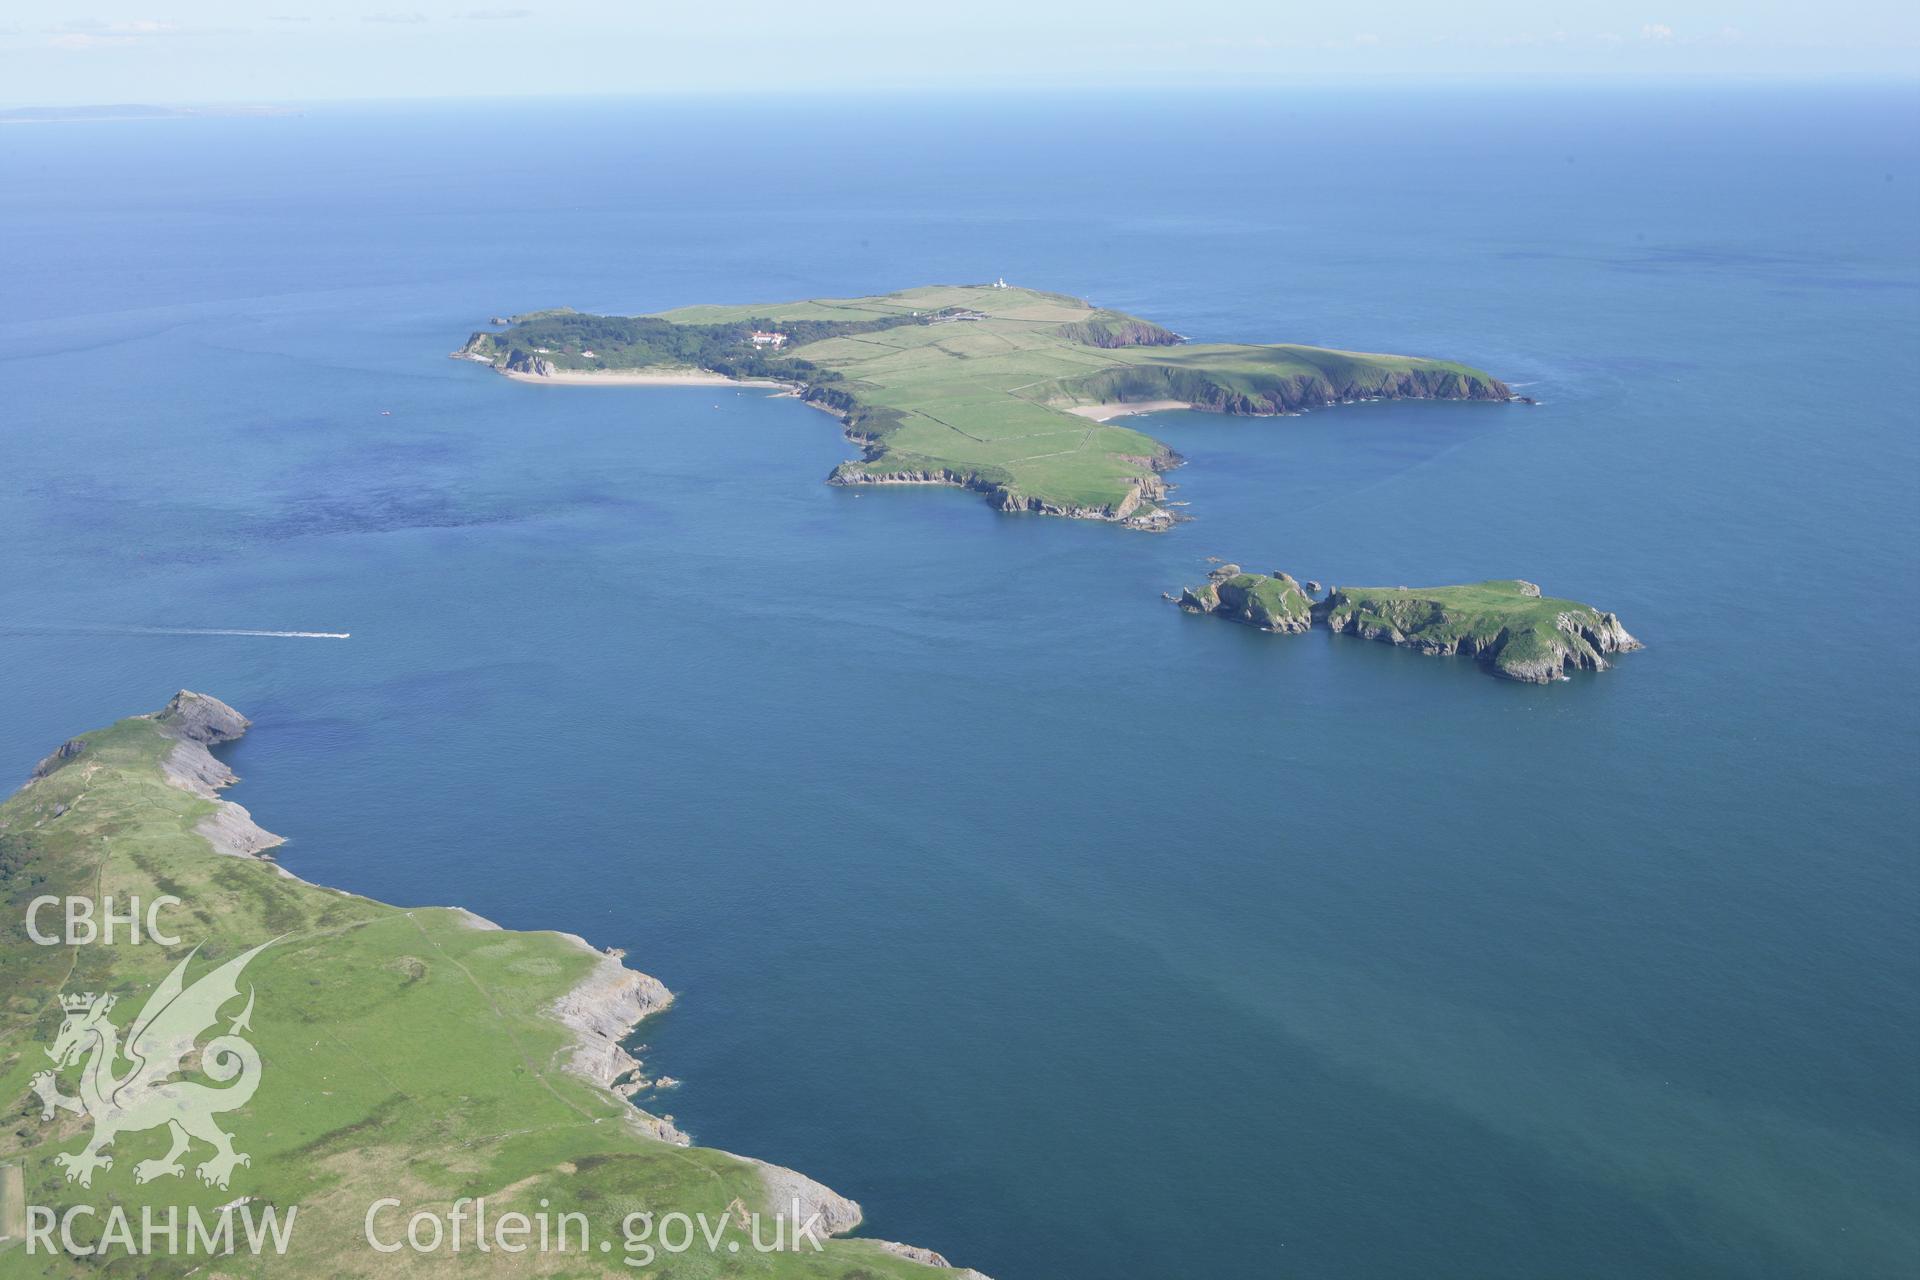 RCAHMW colour oblique aerial photograph of Caldey Island from the north-west. Taken on 30 July 2007 by Toby Driver